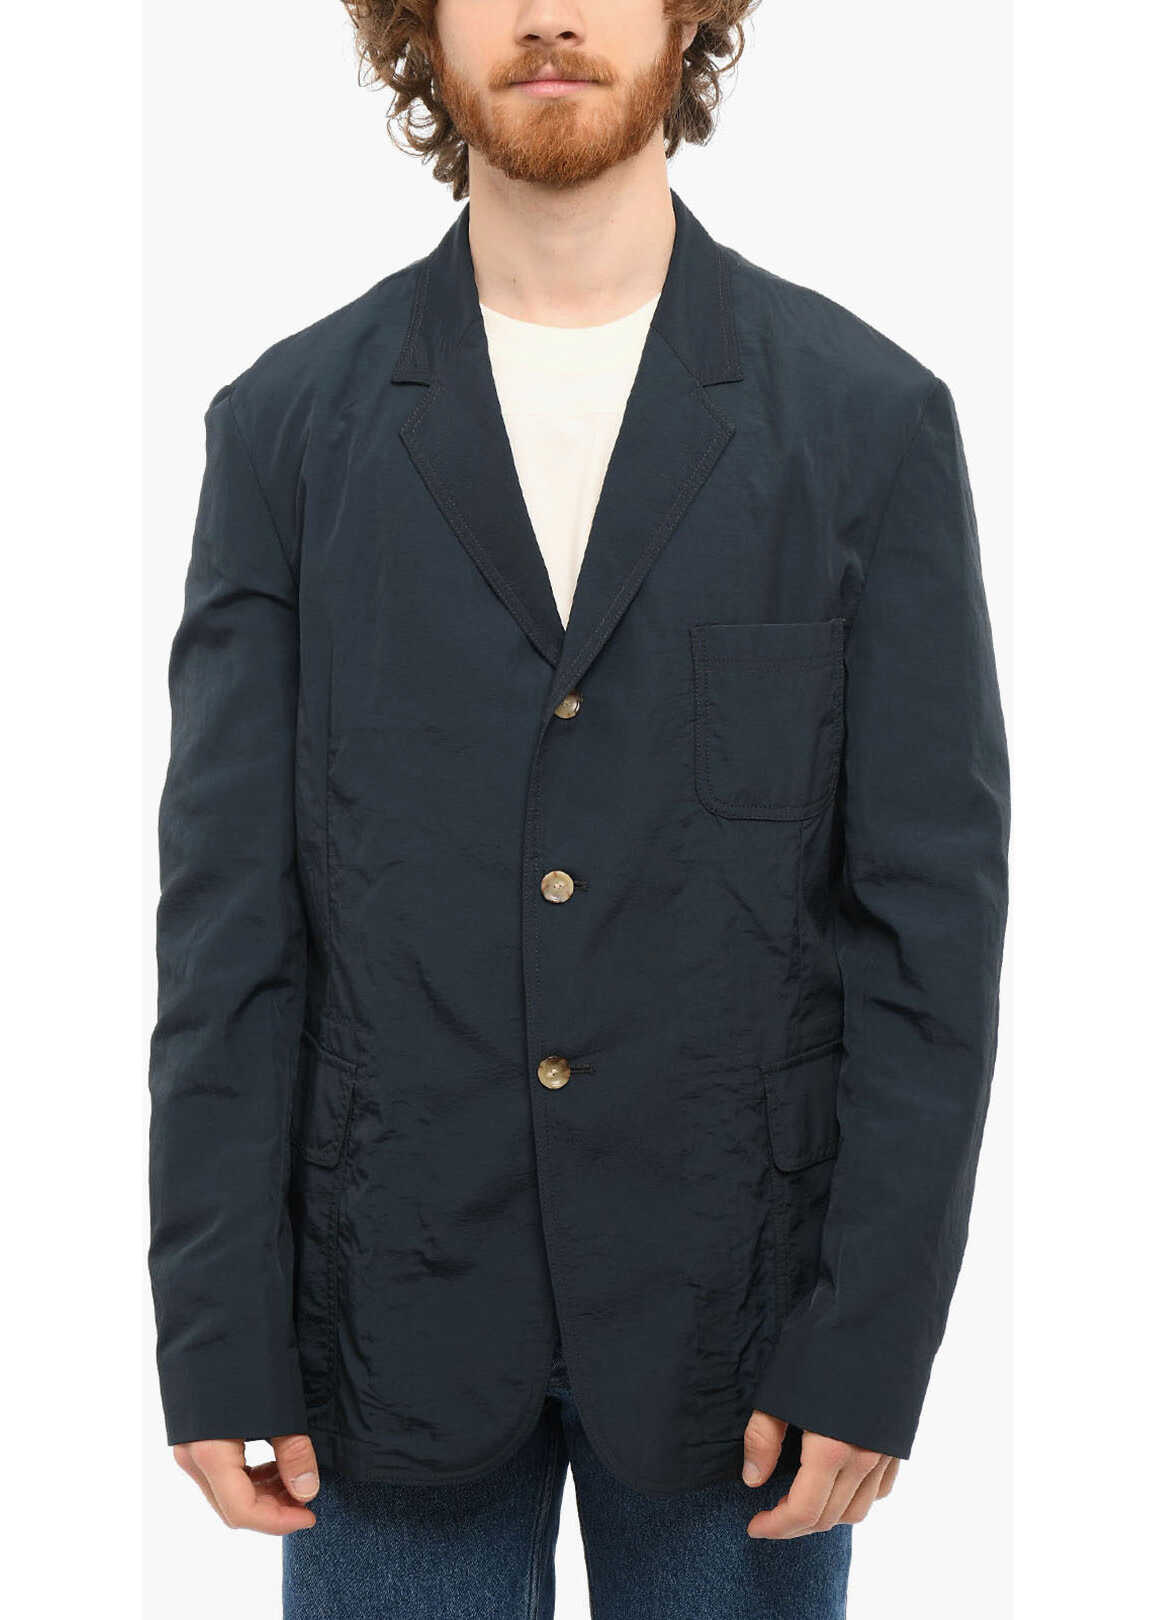 Paul Smith Unlined Blazer With Flap Pockets And Notch Lapel Blue And